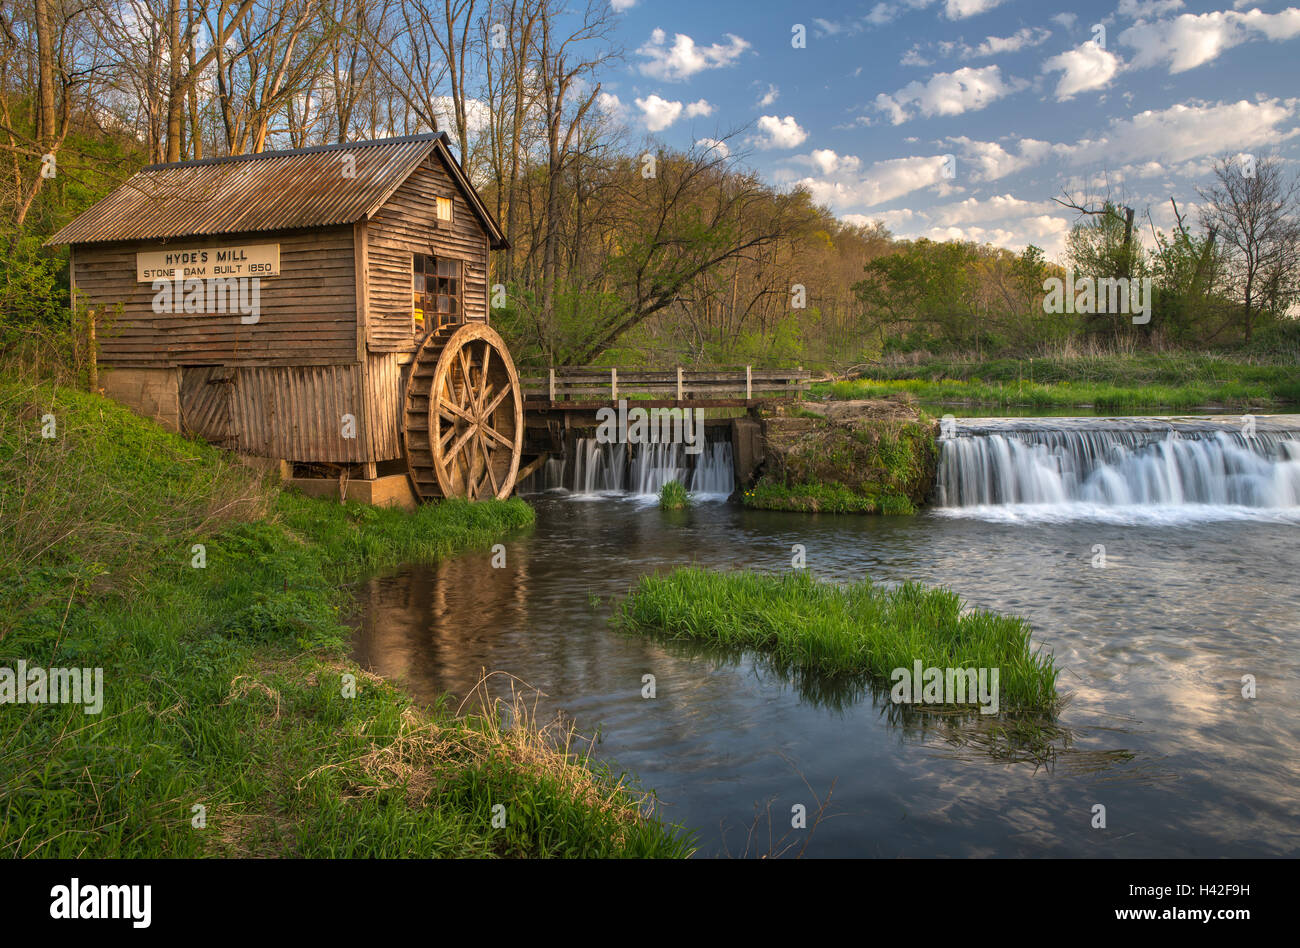 Iowa County, Wisconsin: Hyde's mill in early spring Stock Photo